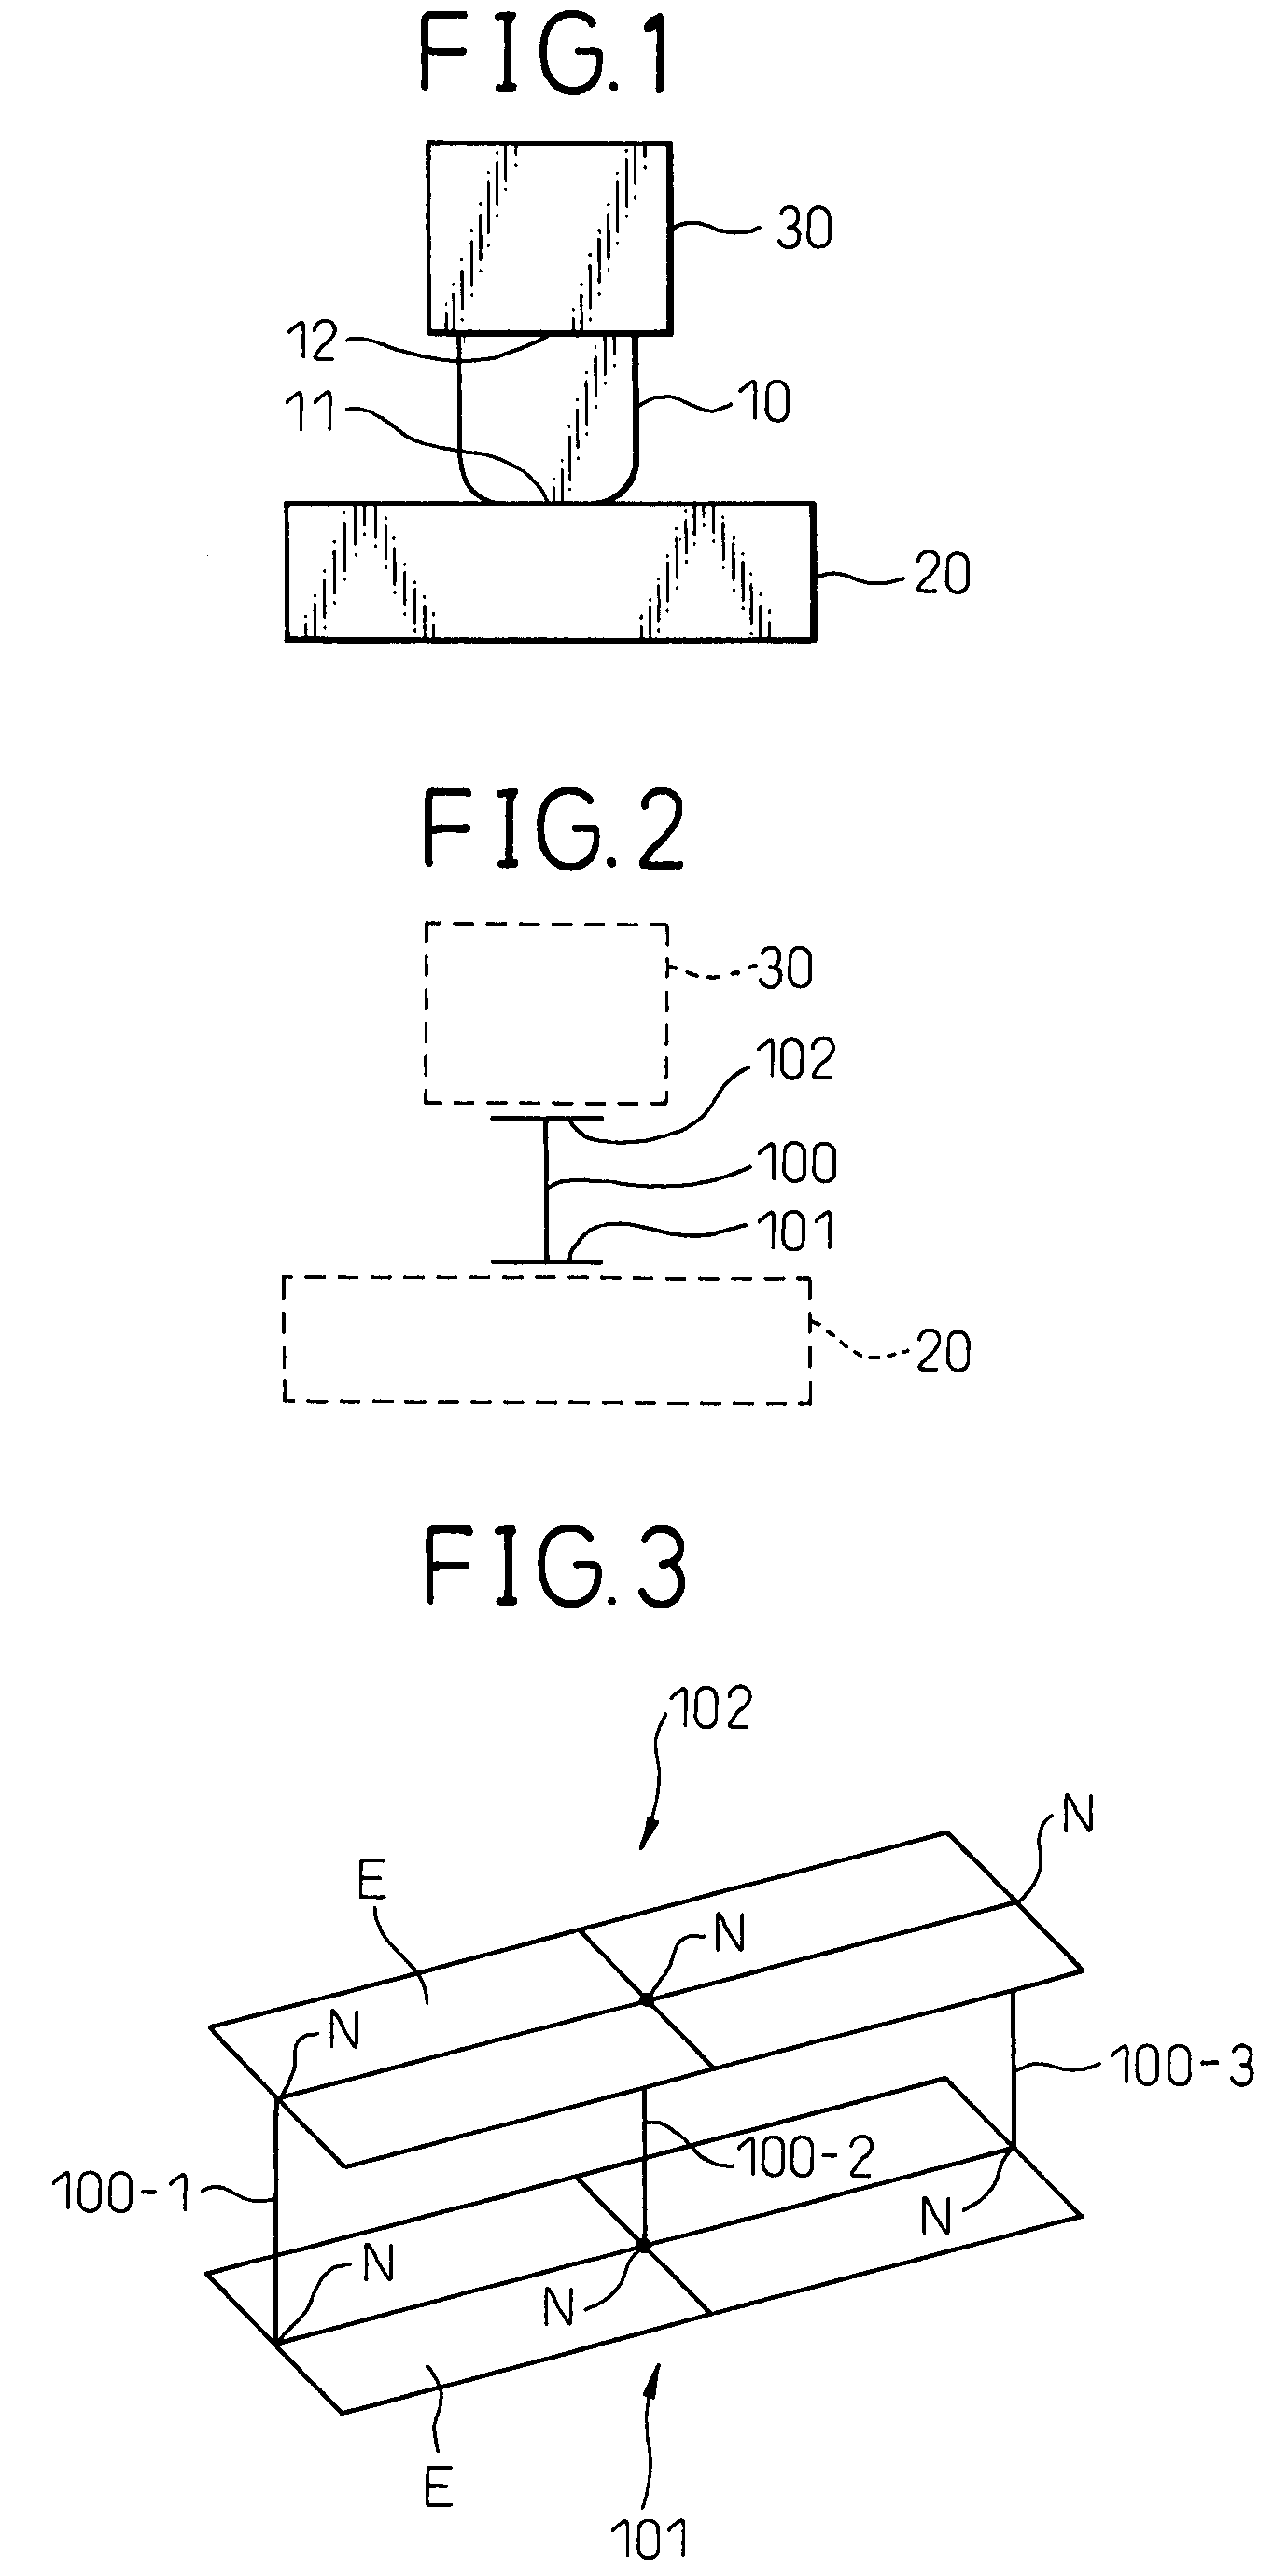 Apparatus and method for creating analysis model for an elastomeric material member with a strong nonlinearity